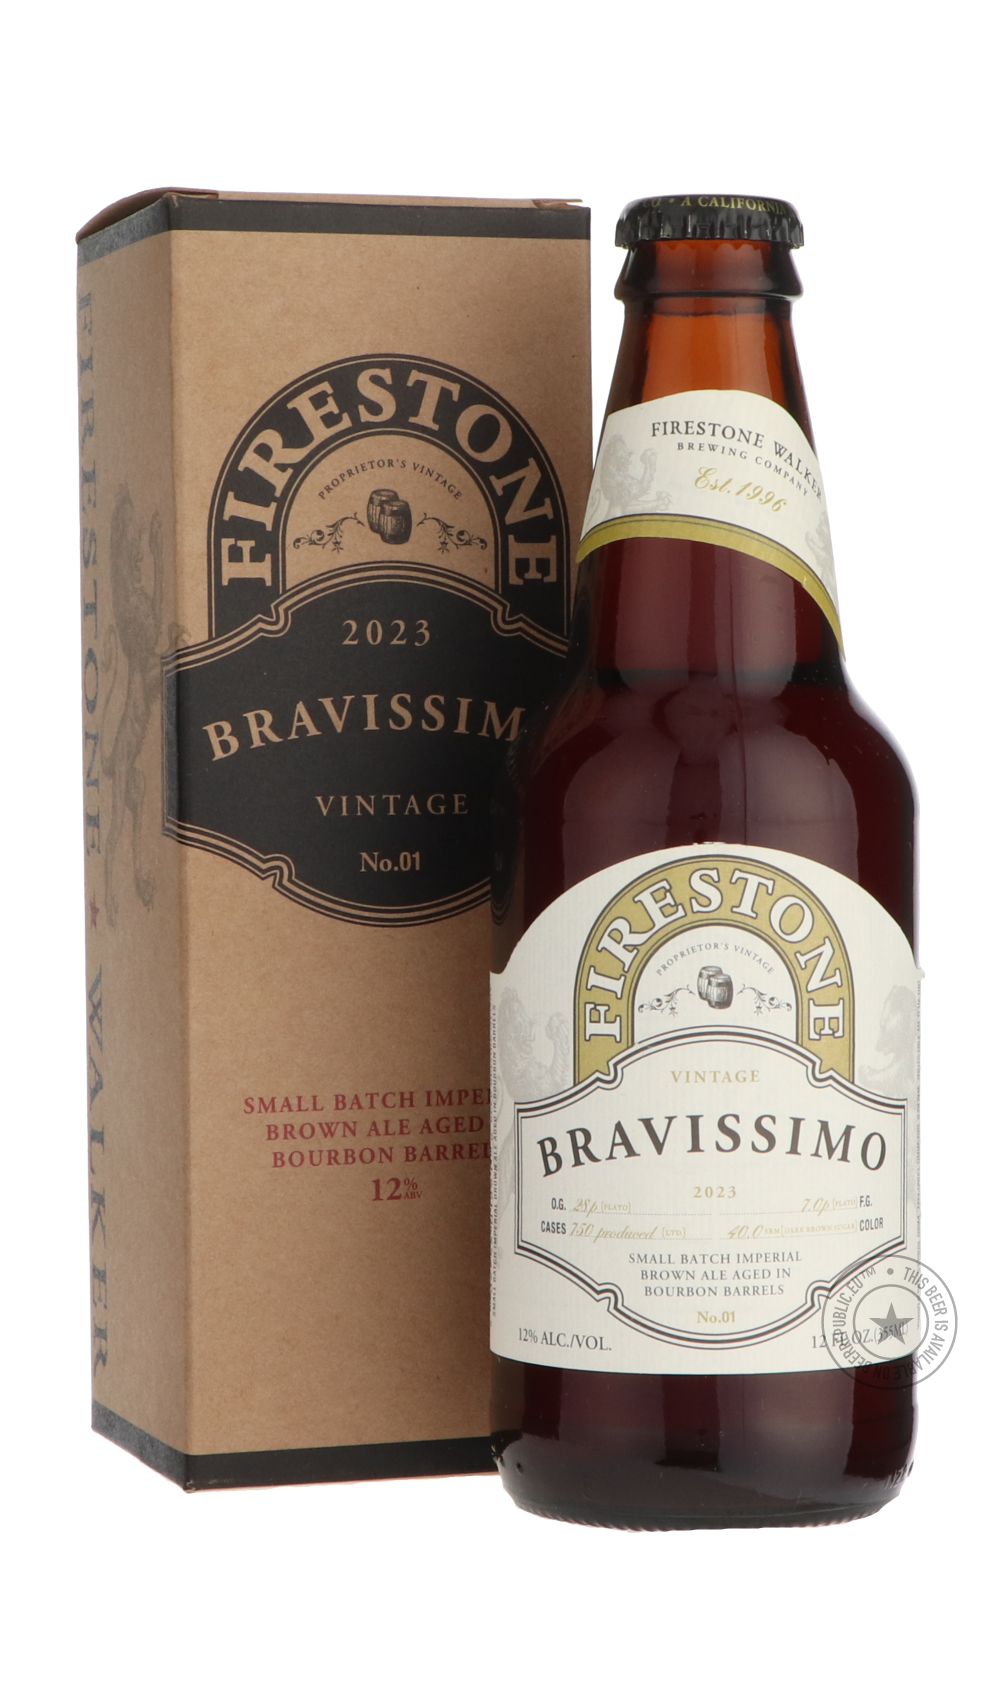 -Firestone Walker- Bravissimo-Brown & Dark- Only @ Beer Republic - The best online beer store for American & Canadian craft beer - Buy beer online from the USA and Canada - Bier online kopen - Amerikaans bier kopen - Craft beer store - Craft beer kopen - Amerikanisch bier kaufen - Bier online kaufen - Acheter biere online - IPA - Stout - Porter - New England IPA - Hazy IPA - Imperial Stout - Barrel Aged - Barrel Aged Imperial Stout - Brown - Dark beer - Blond - Blonde - Pilsner - Lager - Wheat - Weizen - Am